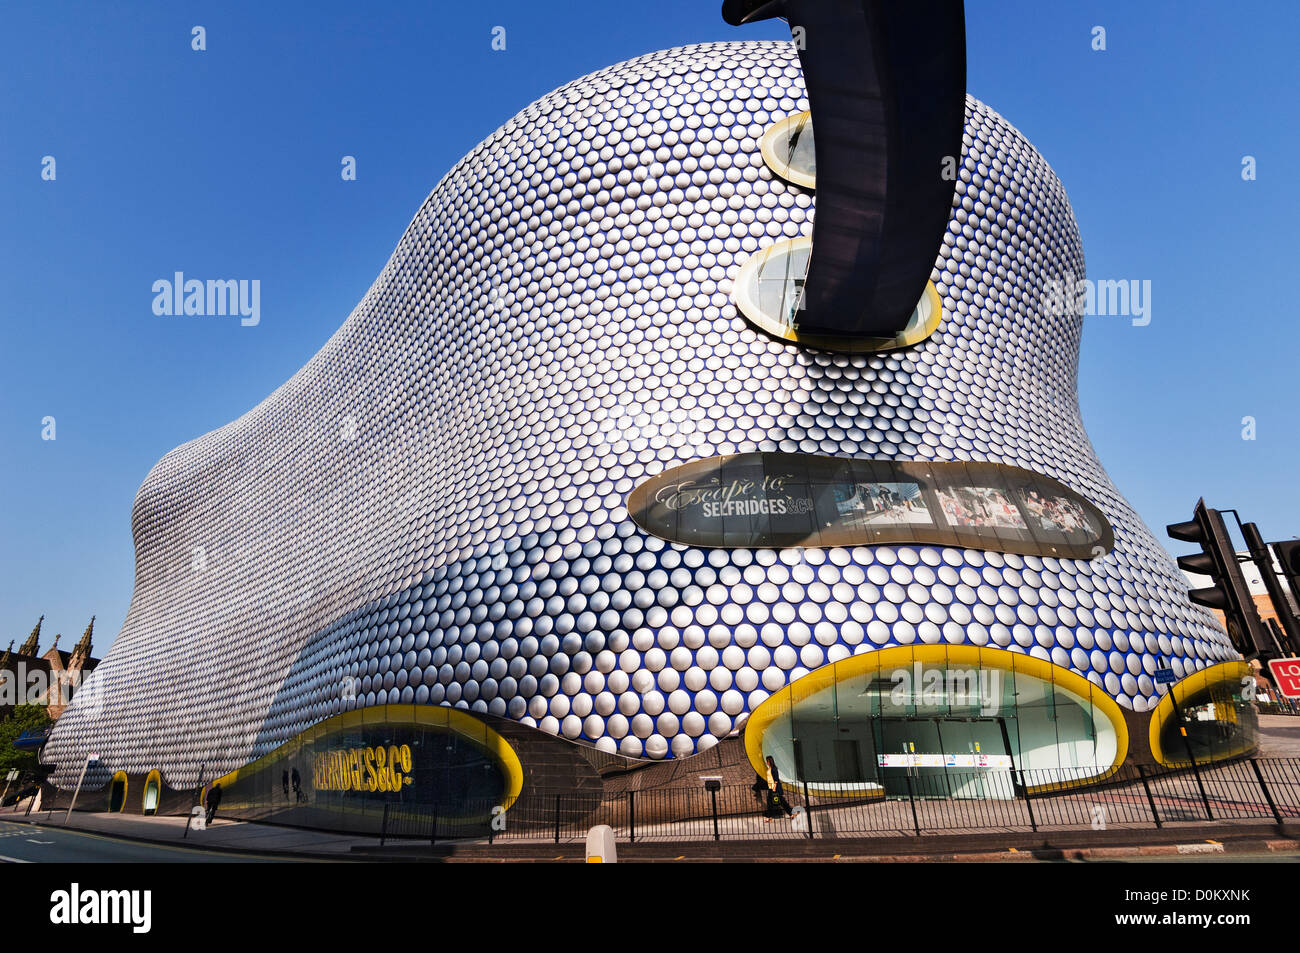 The Selfridges building in the Bullring shopping area of Birmingham. Stock Photo